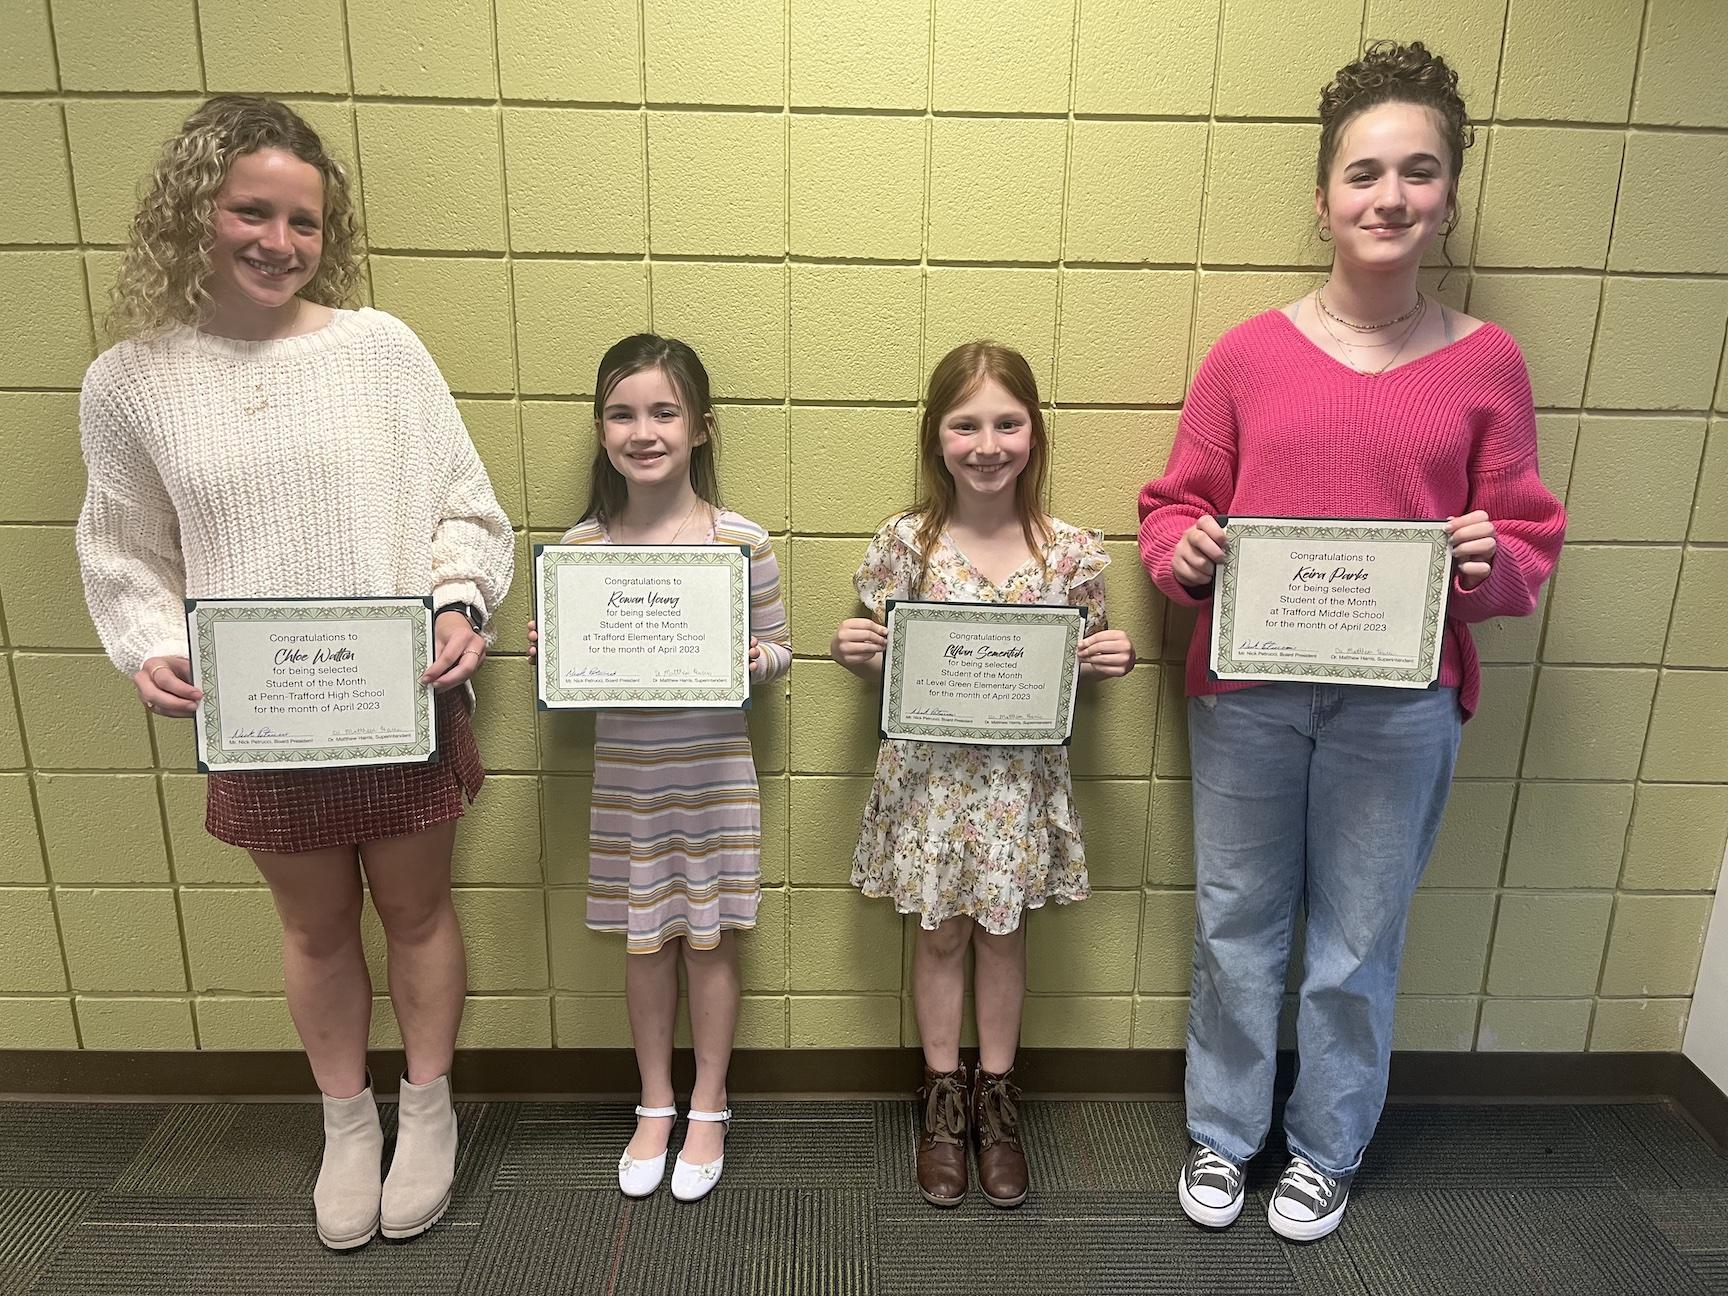 Students of the month Chloe Walton, Rowan Young, Lillian Sementuh, and Keira Parks